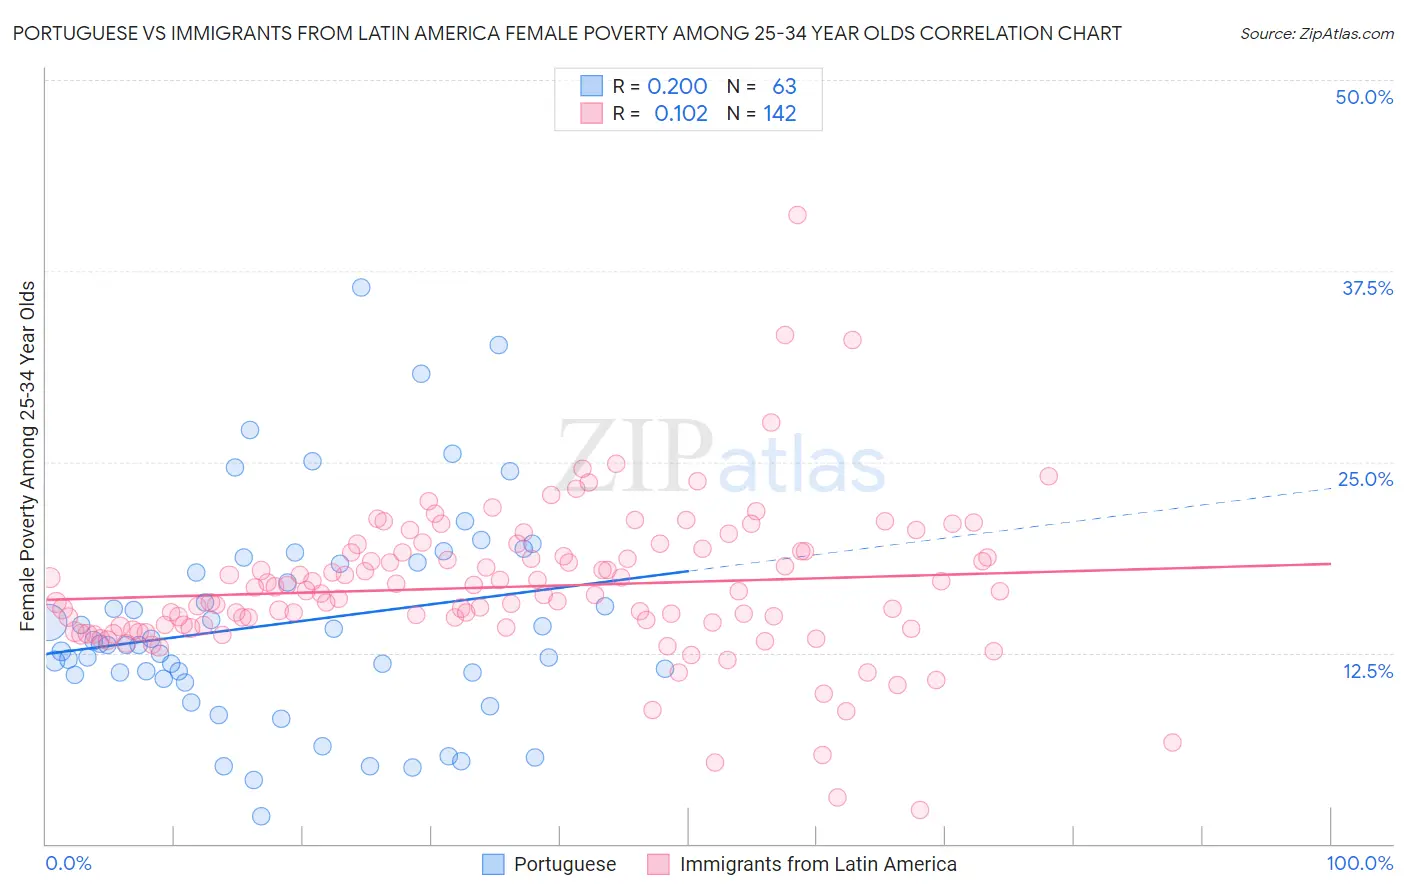 Portuguese vs Immigrants from Latin America Female Poverty Among 25-34 Year Olds